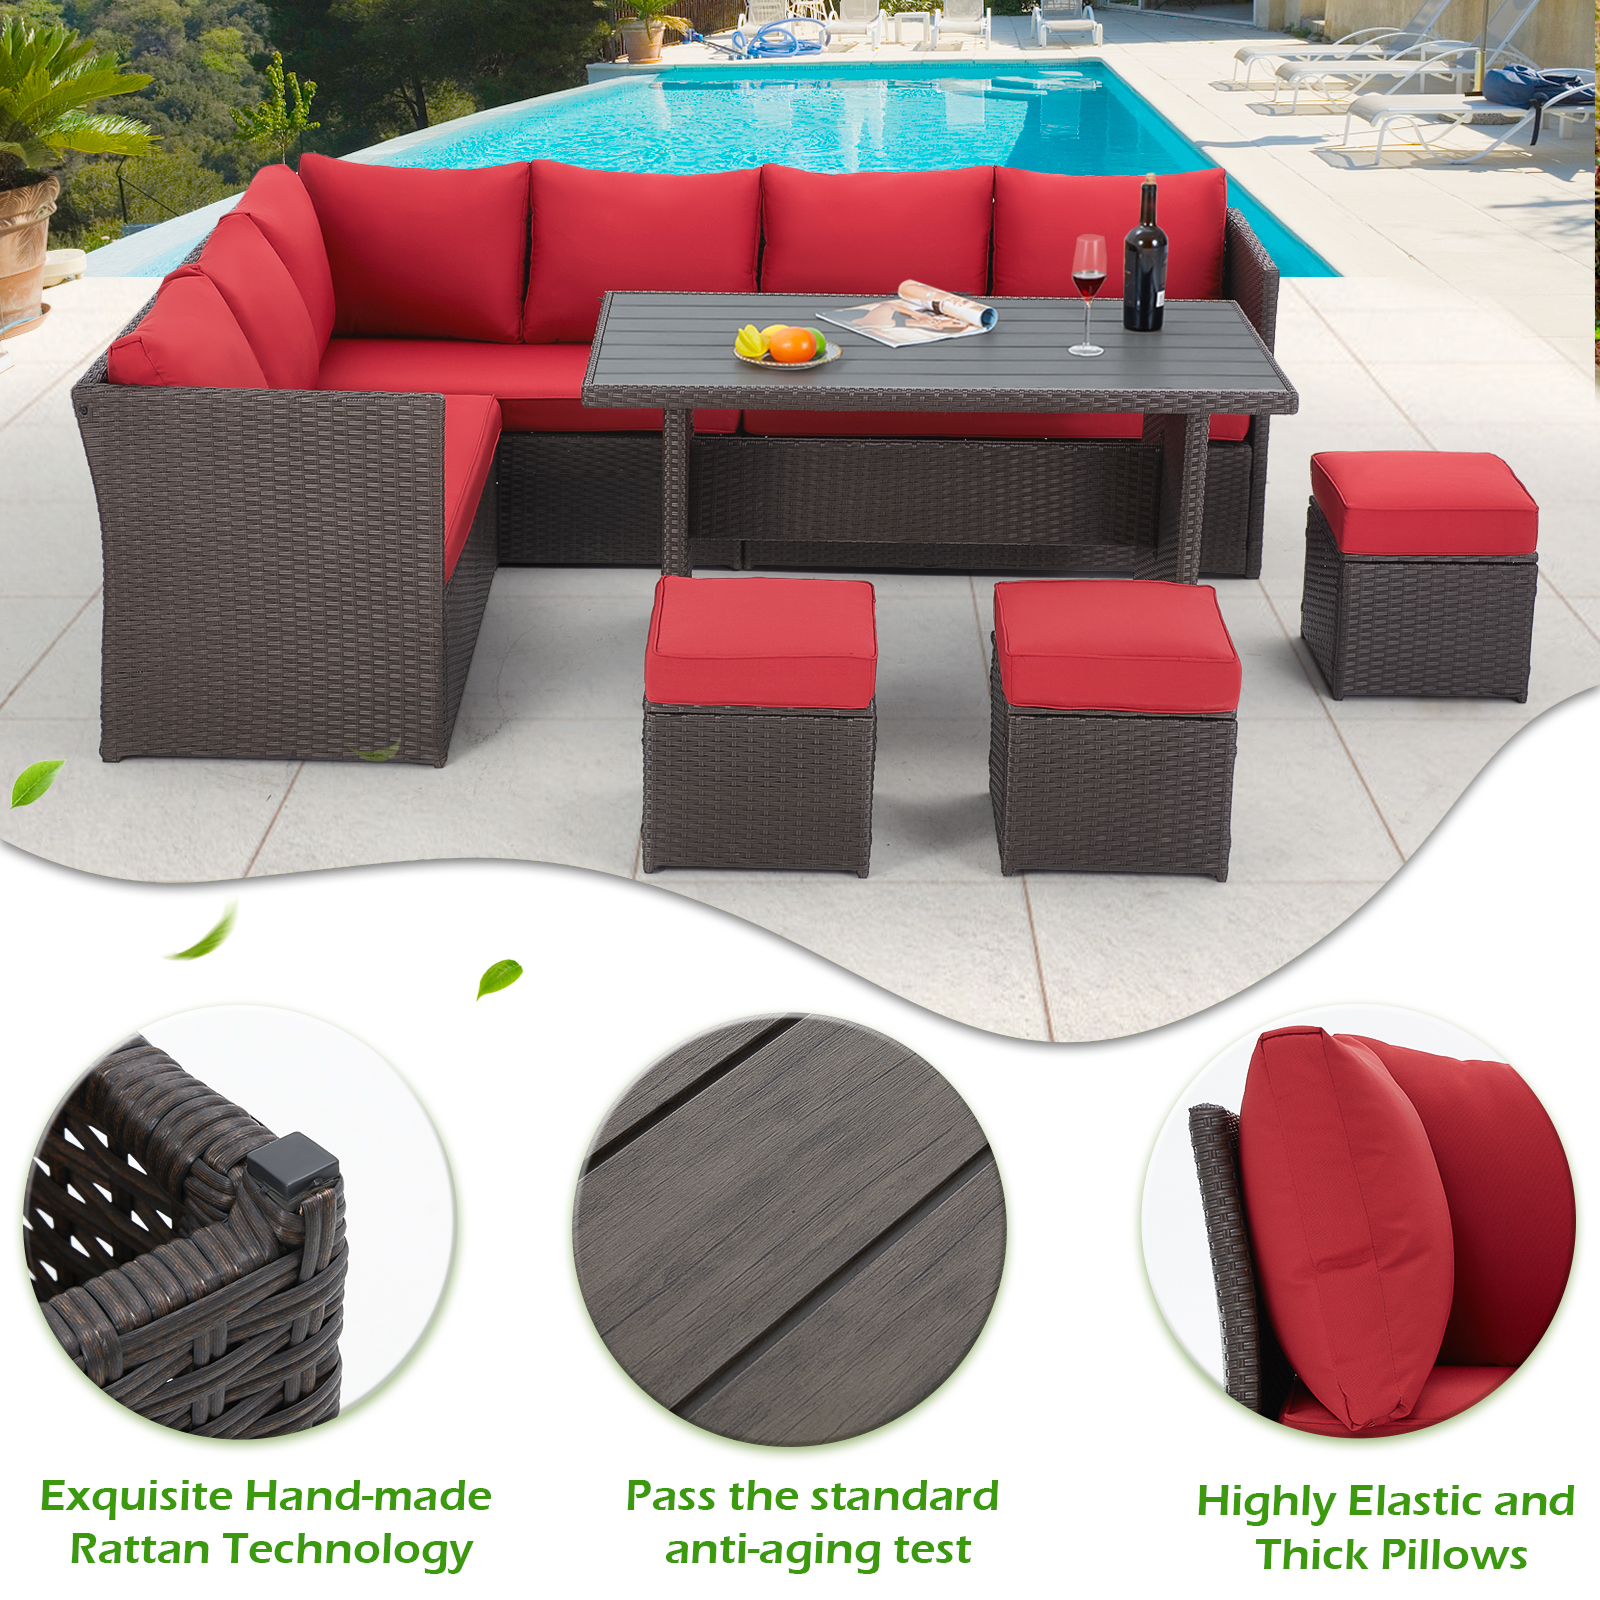 AECOJOY 7 Piece Patio Conversation Set, Outdoor Sectional Sofa Rattan Wicker Dining Furniture, Red - image 5 of 9